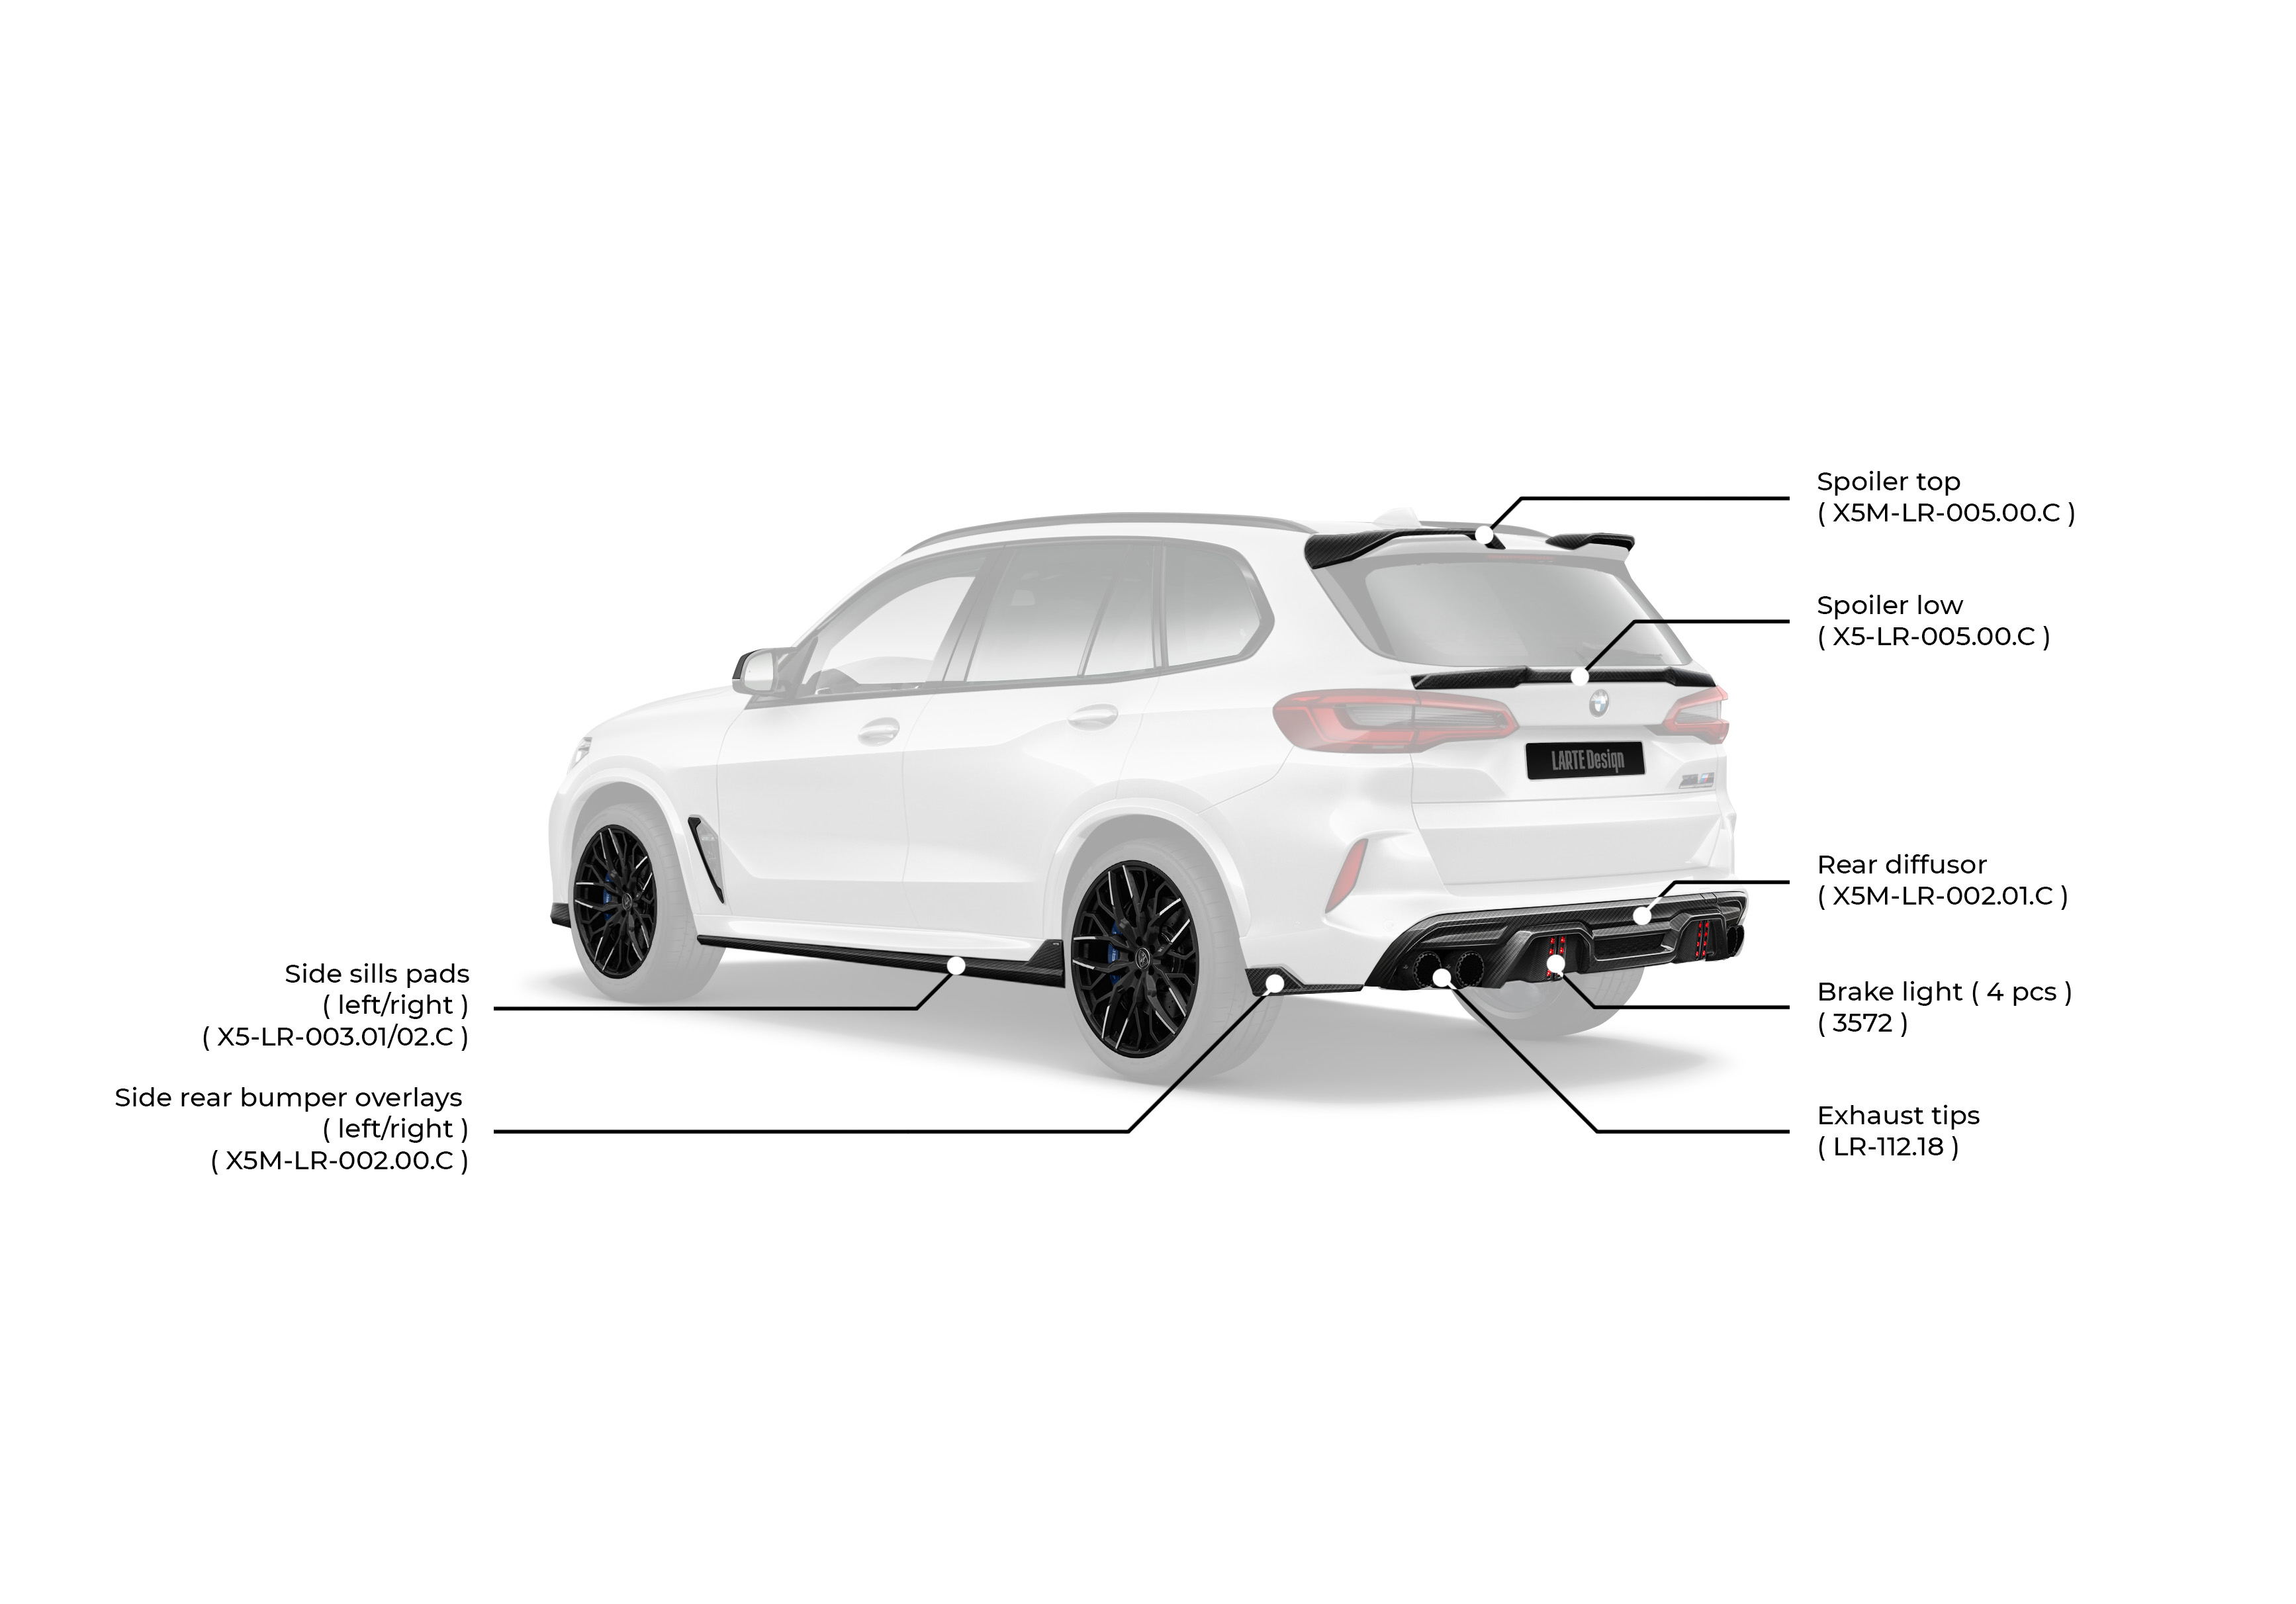 Check our price and buy Larte Design carbon fiber body kit set for BMW X5 M F95!